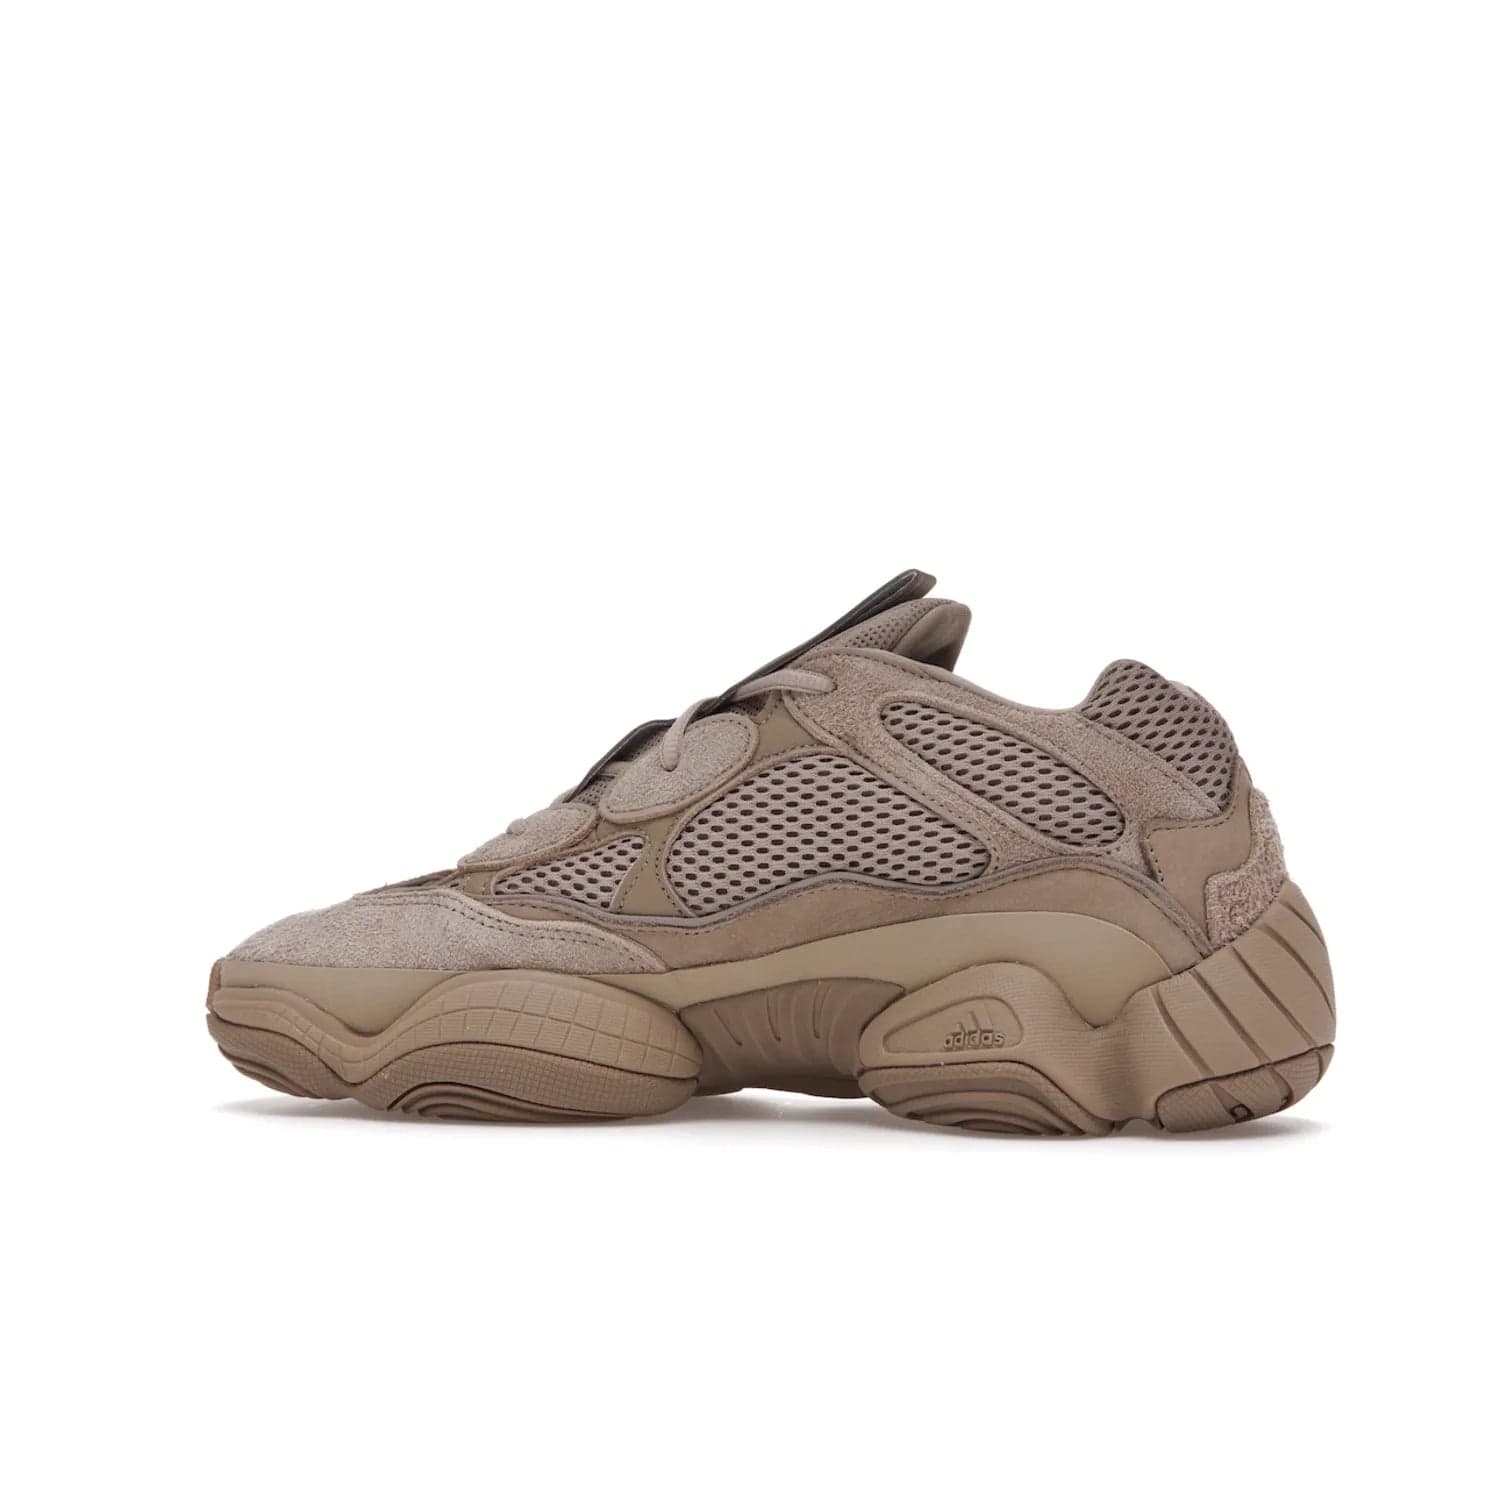 adidas Yeezy 500 Taupe Light - Image 21 - Only at www.BallersClubKickz.com - The adidas Yeezy 500 Taupe Light combines mesh, leather, and suede, with a durable adiPRENE sole for an eye-catching accessory. Reflective piping adds the perfect finishing touches to this unique silhouette. Ideal for any wardrobe, releasing in June 2021.